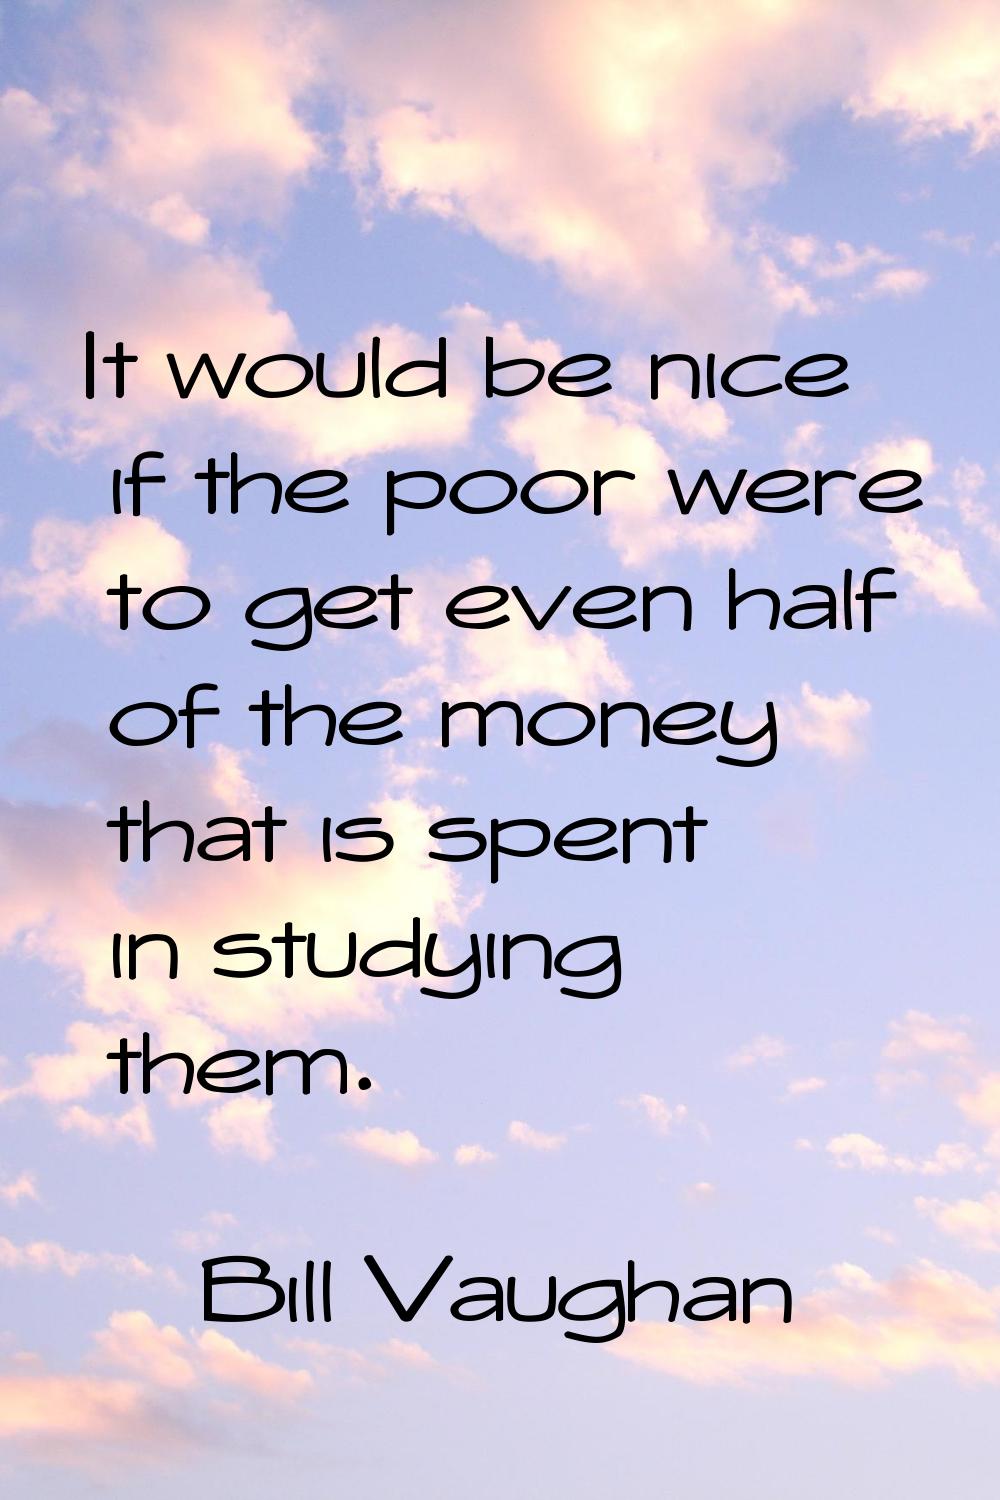 It would be nice if the poor were to get even half of the money that is spent in studying them.